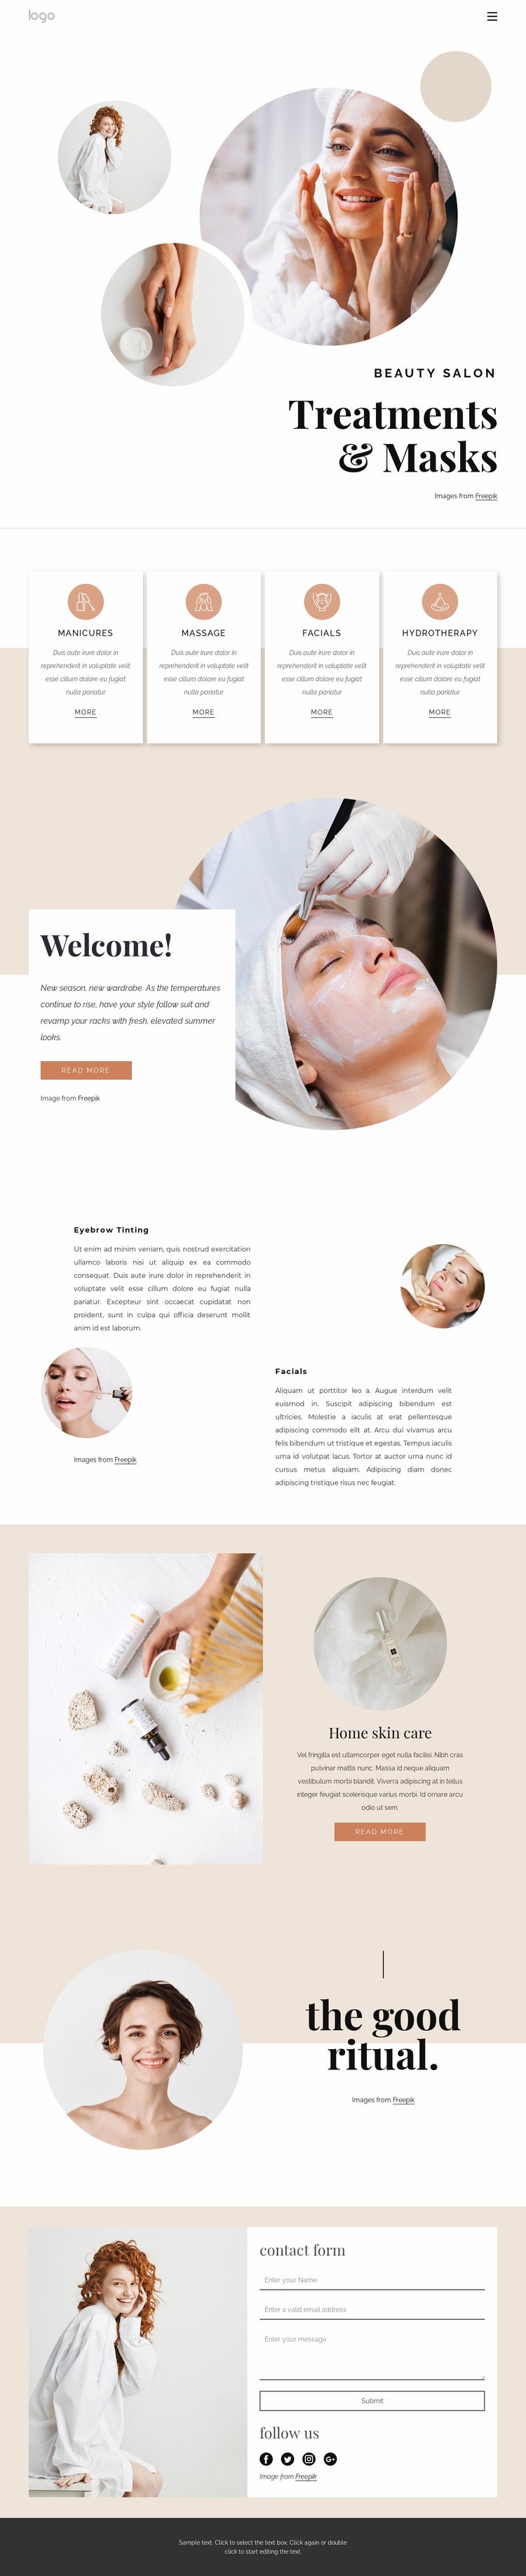 Body treatments and massages Homepage Design